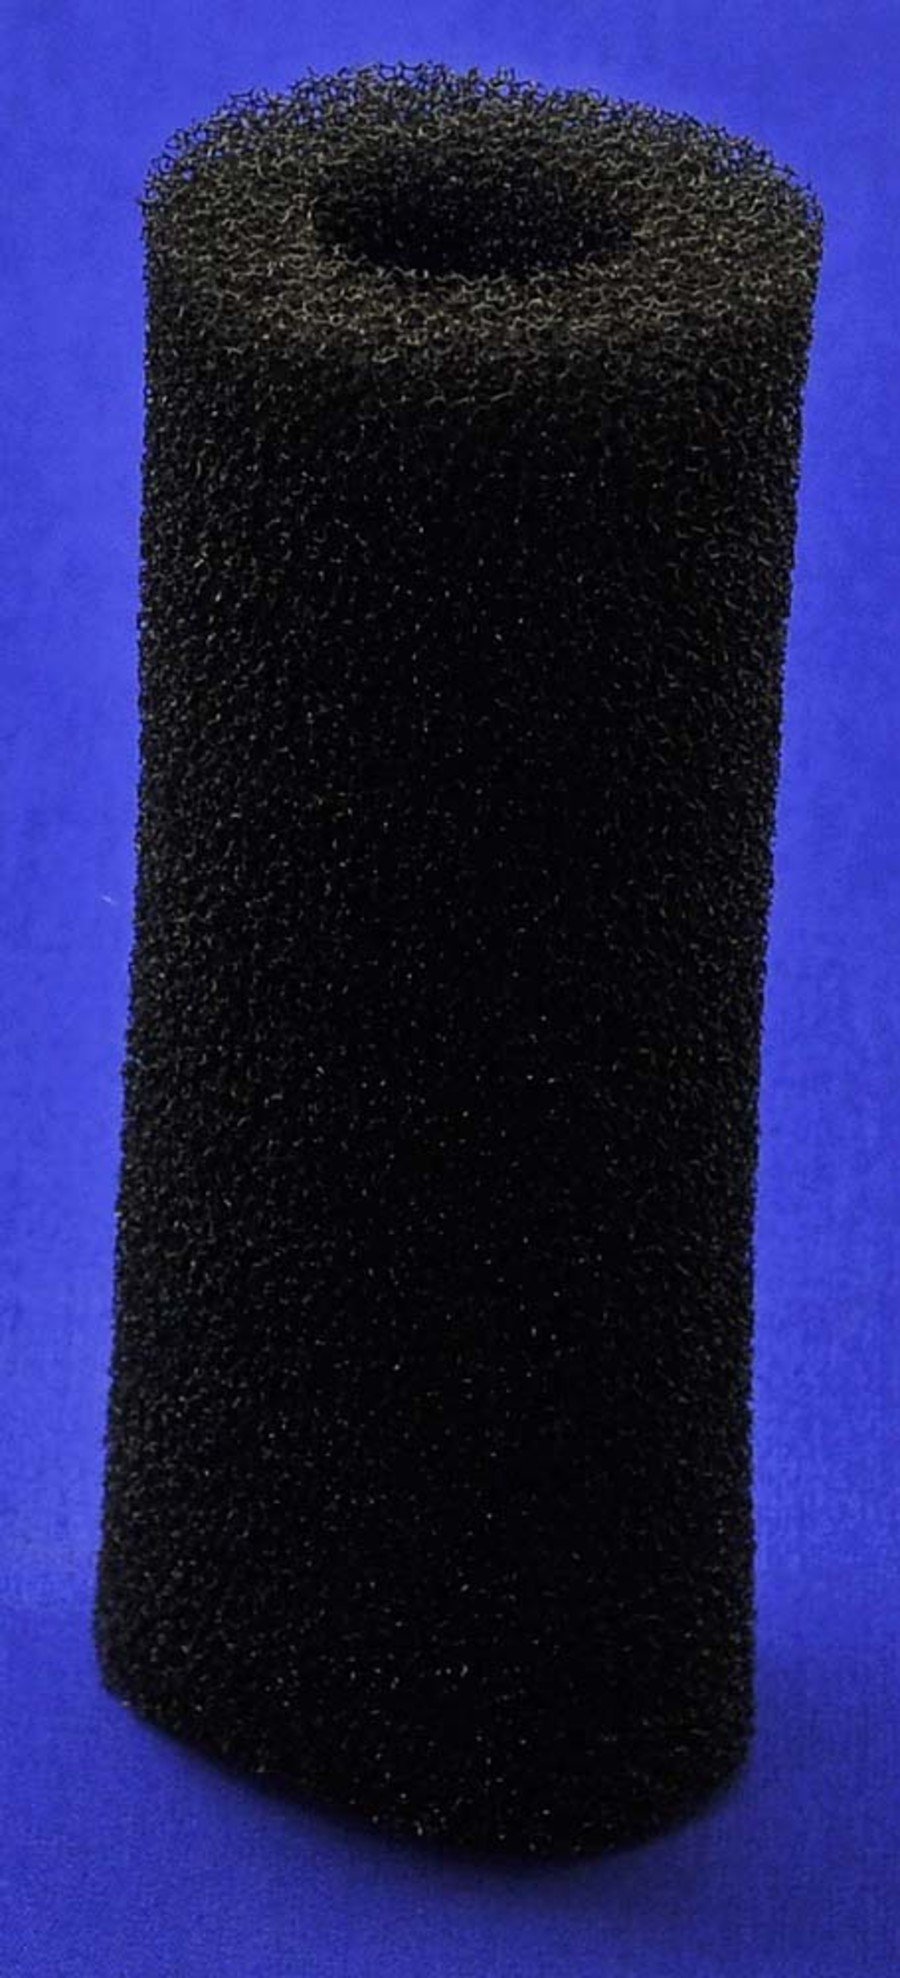 Eshopps Replacement Filter Foam for Filters Black Small, Round, Eshopps